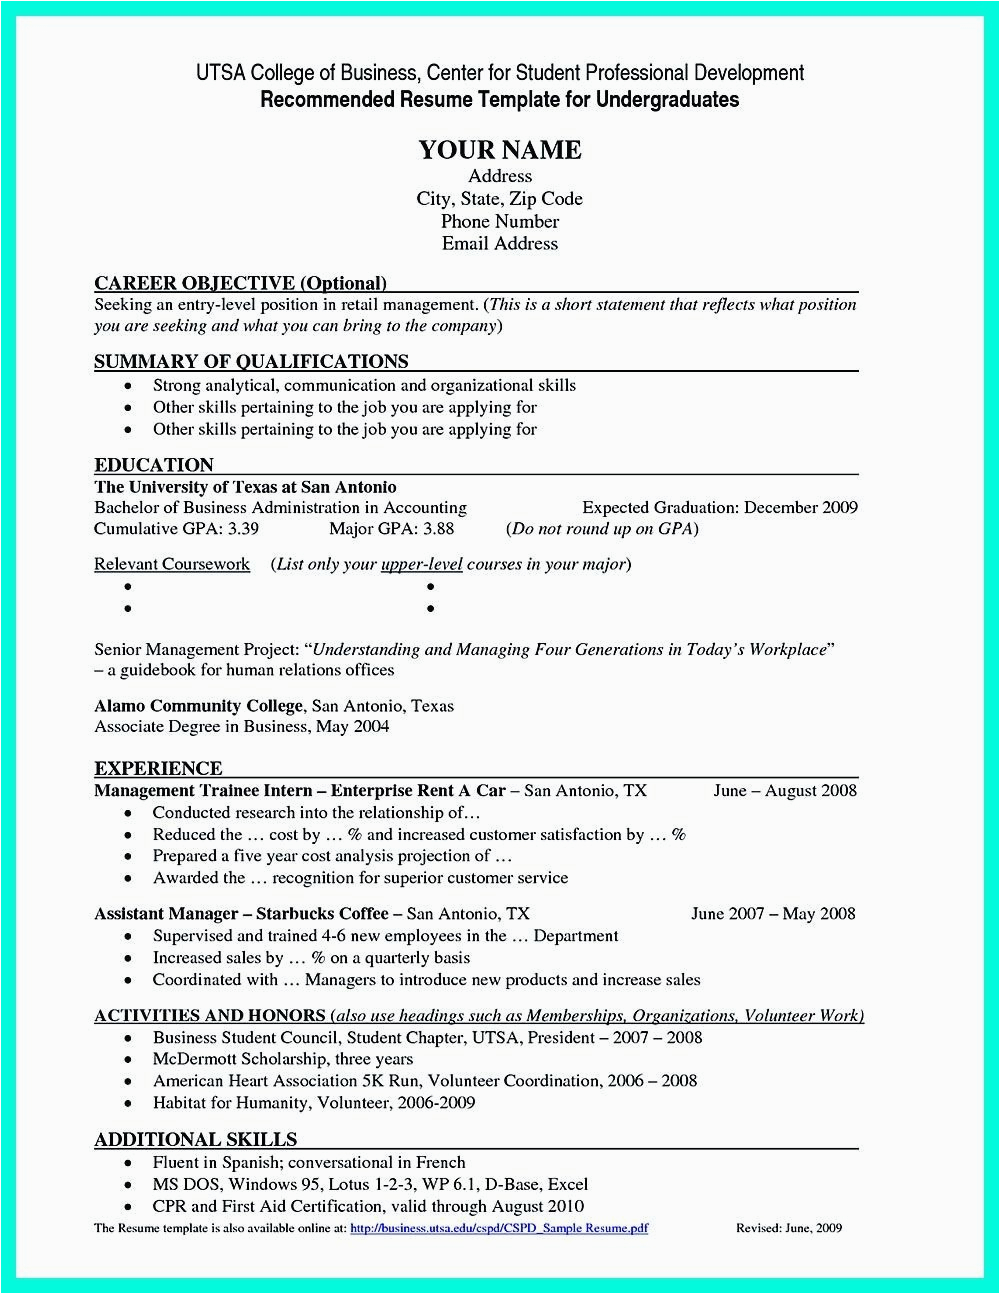 Resume Samples for College Students Entry Level 11 12 Entry Level College Student Resume Samples